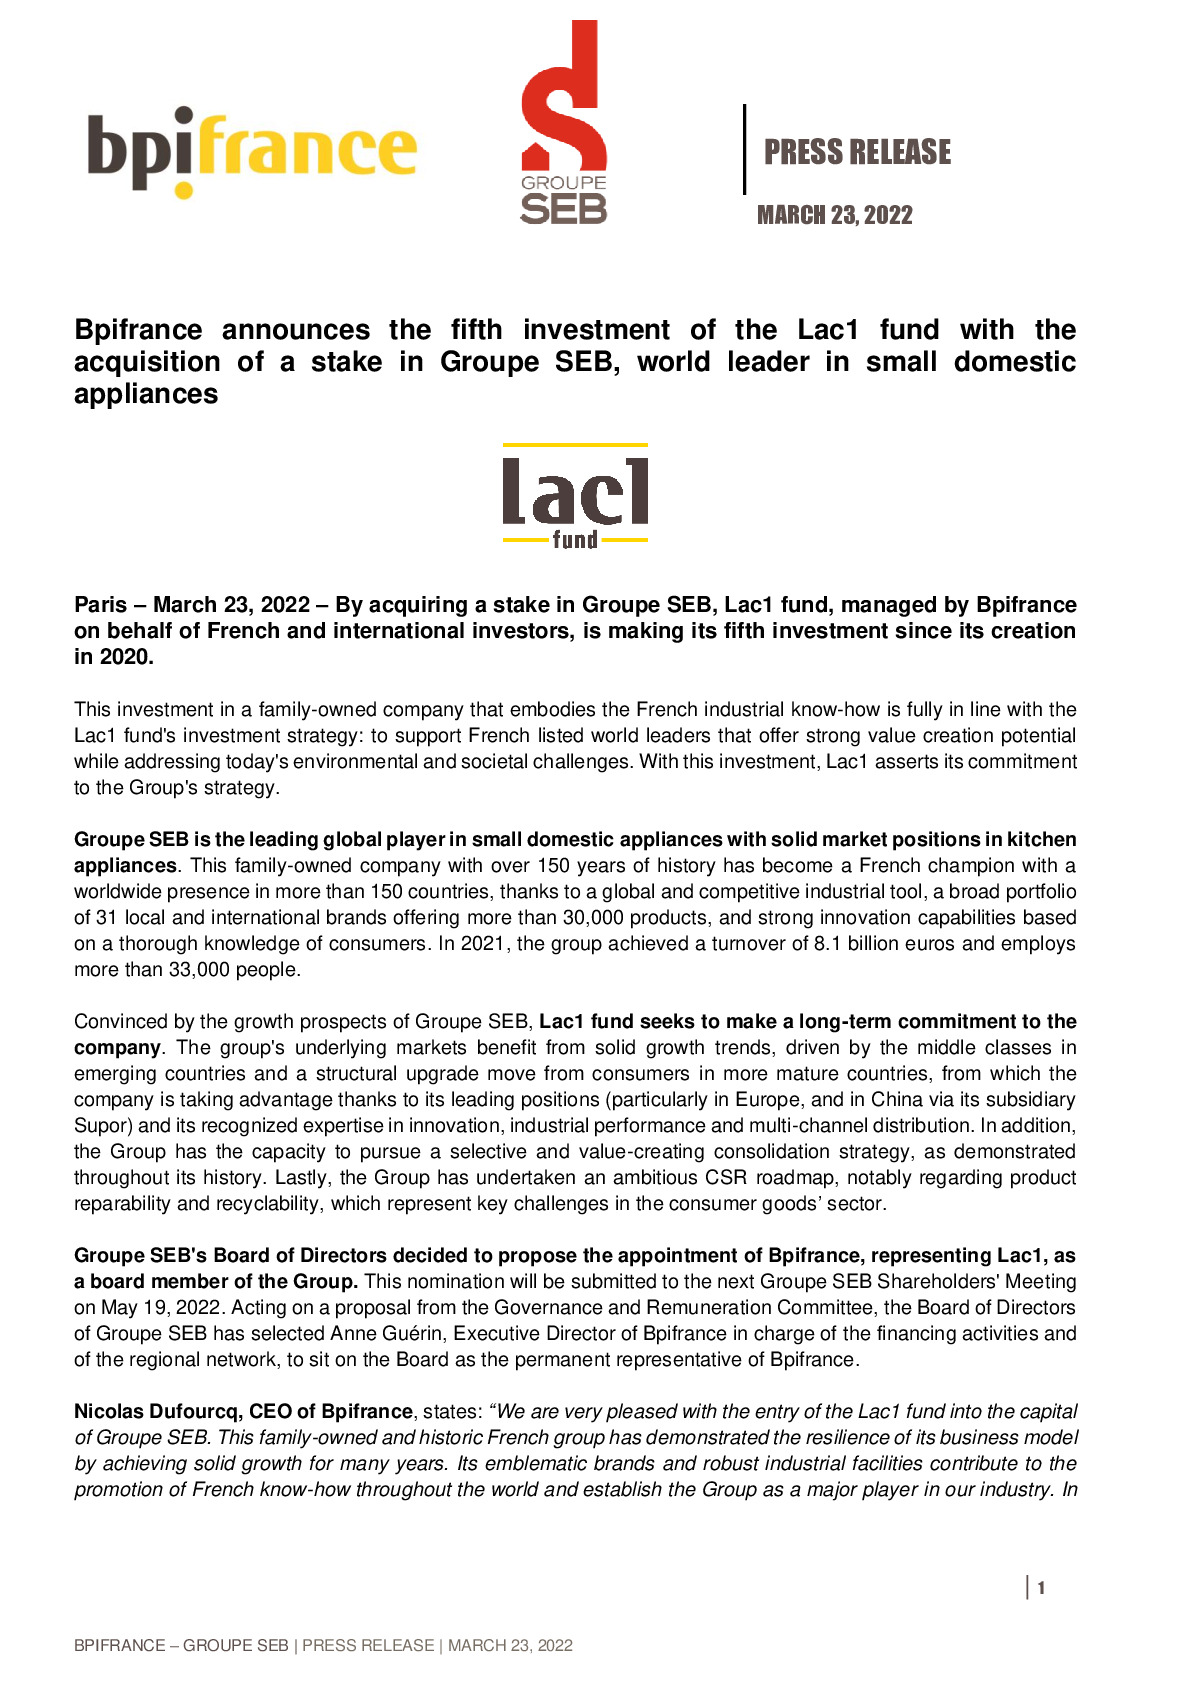 2022 23 03 – PR Groupe SEB x Bpifrance – Lac1 acquires a stake in Groupe SEB-pdf